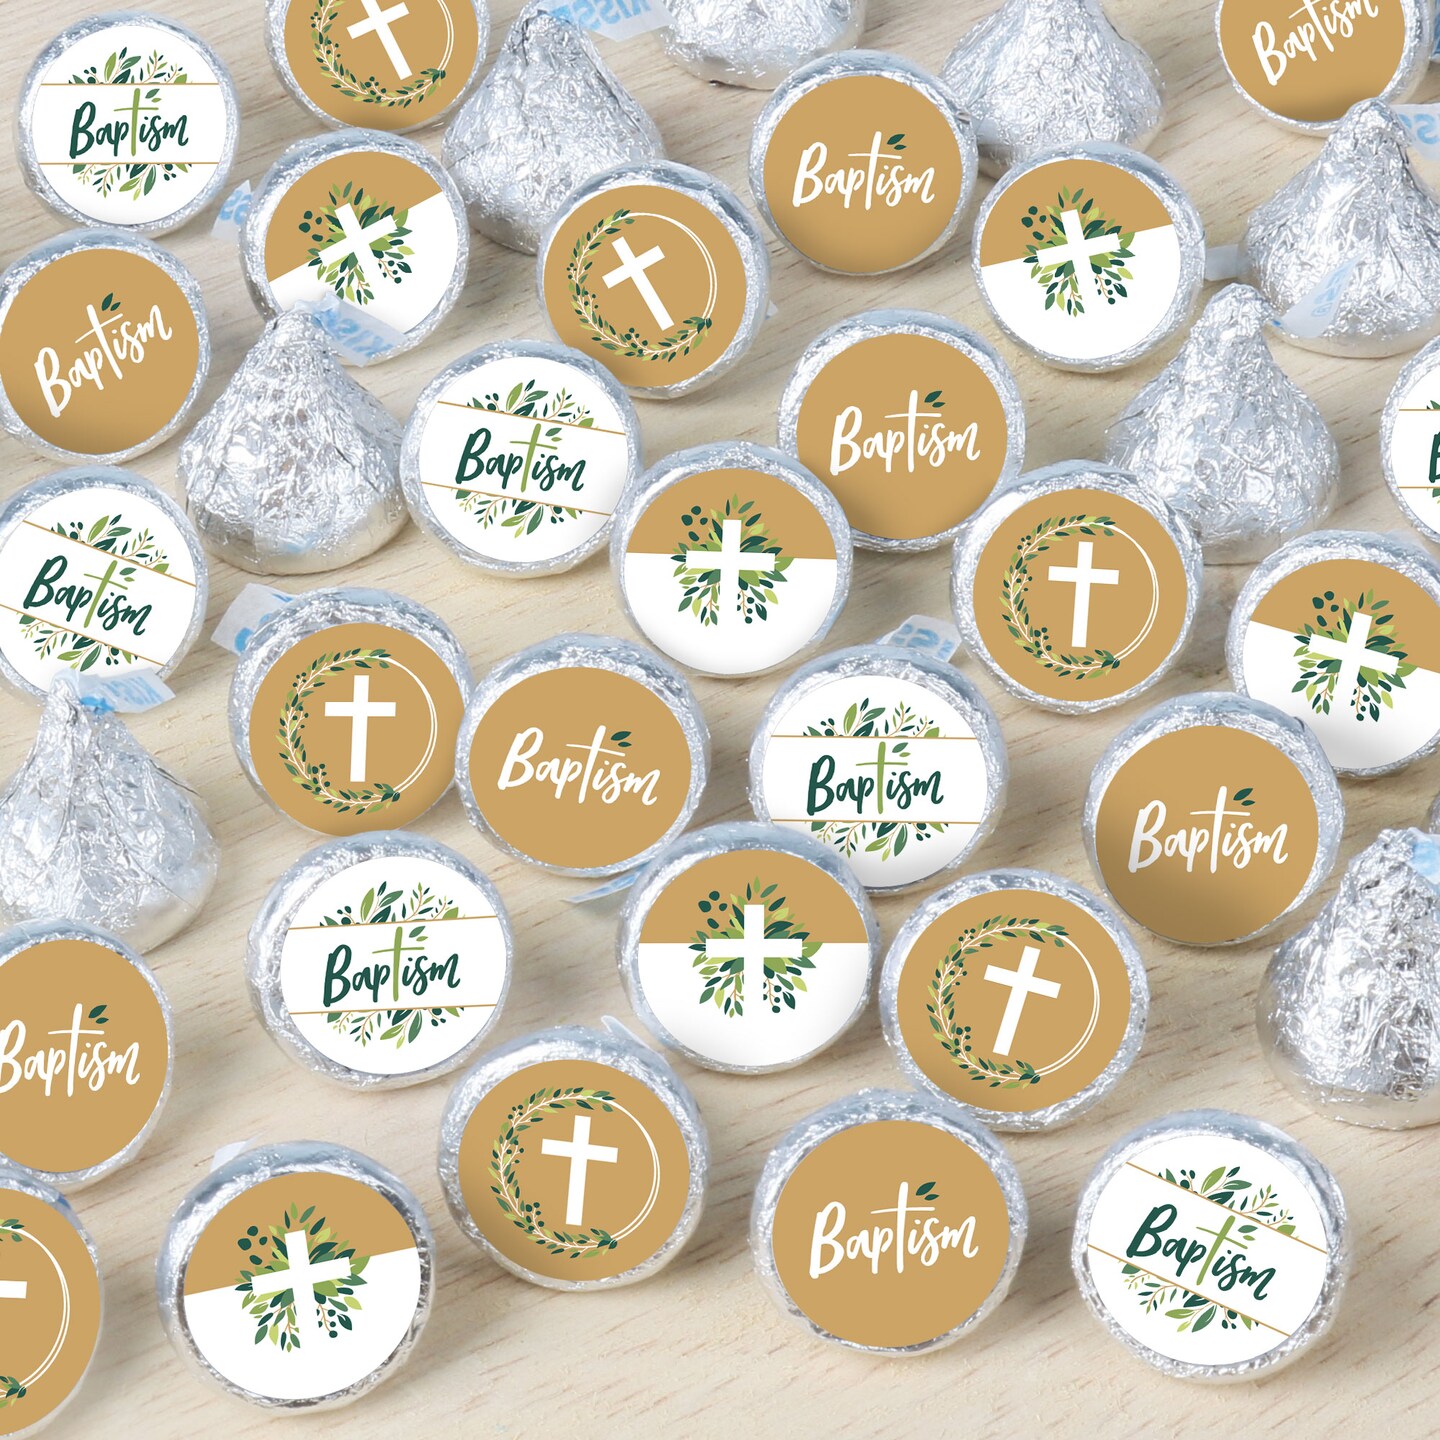 Pin on Candy party favors